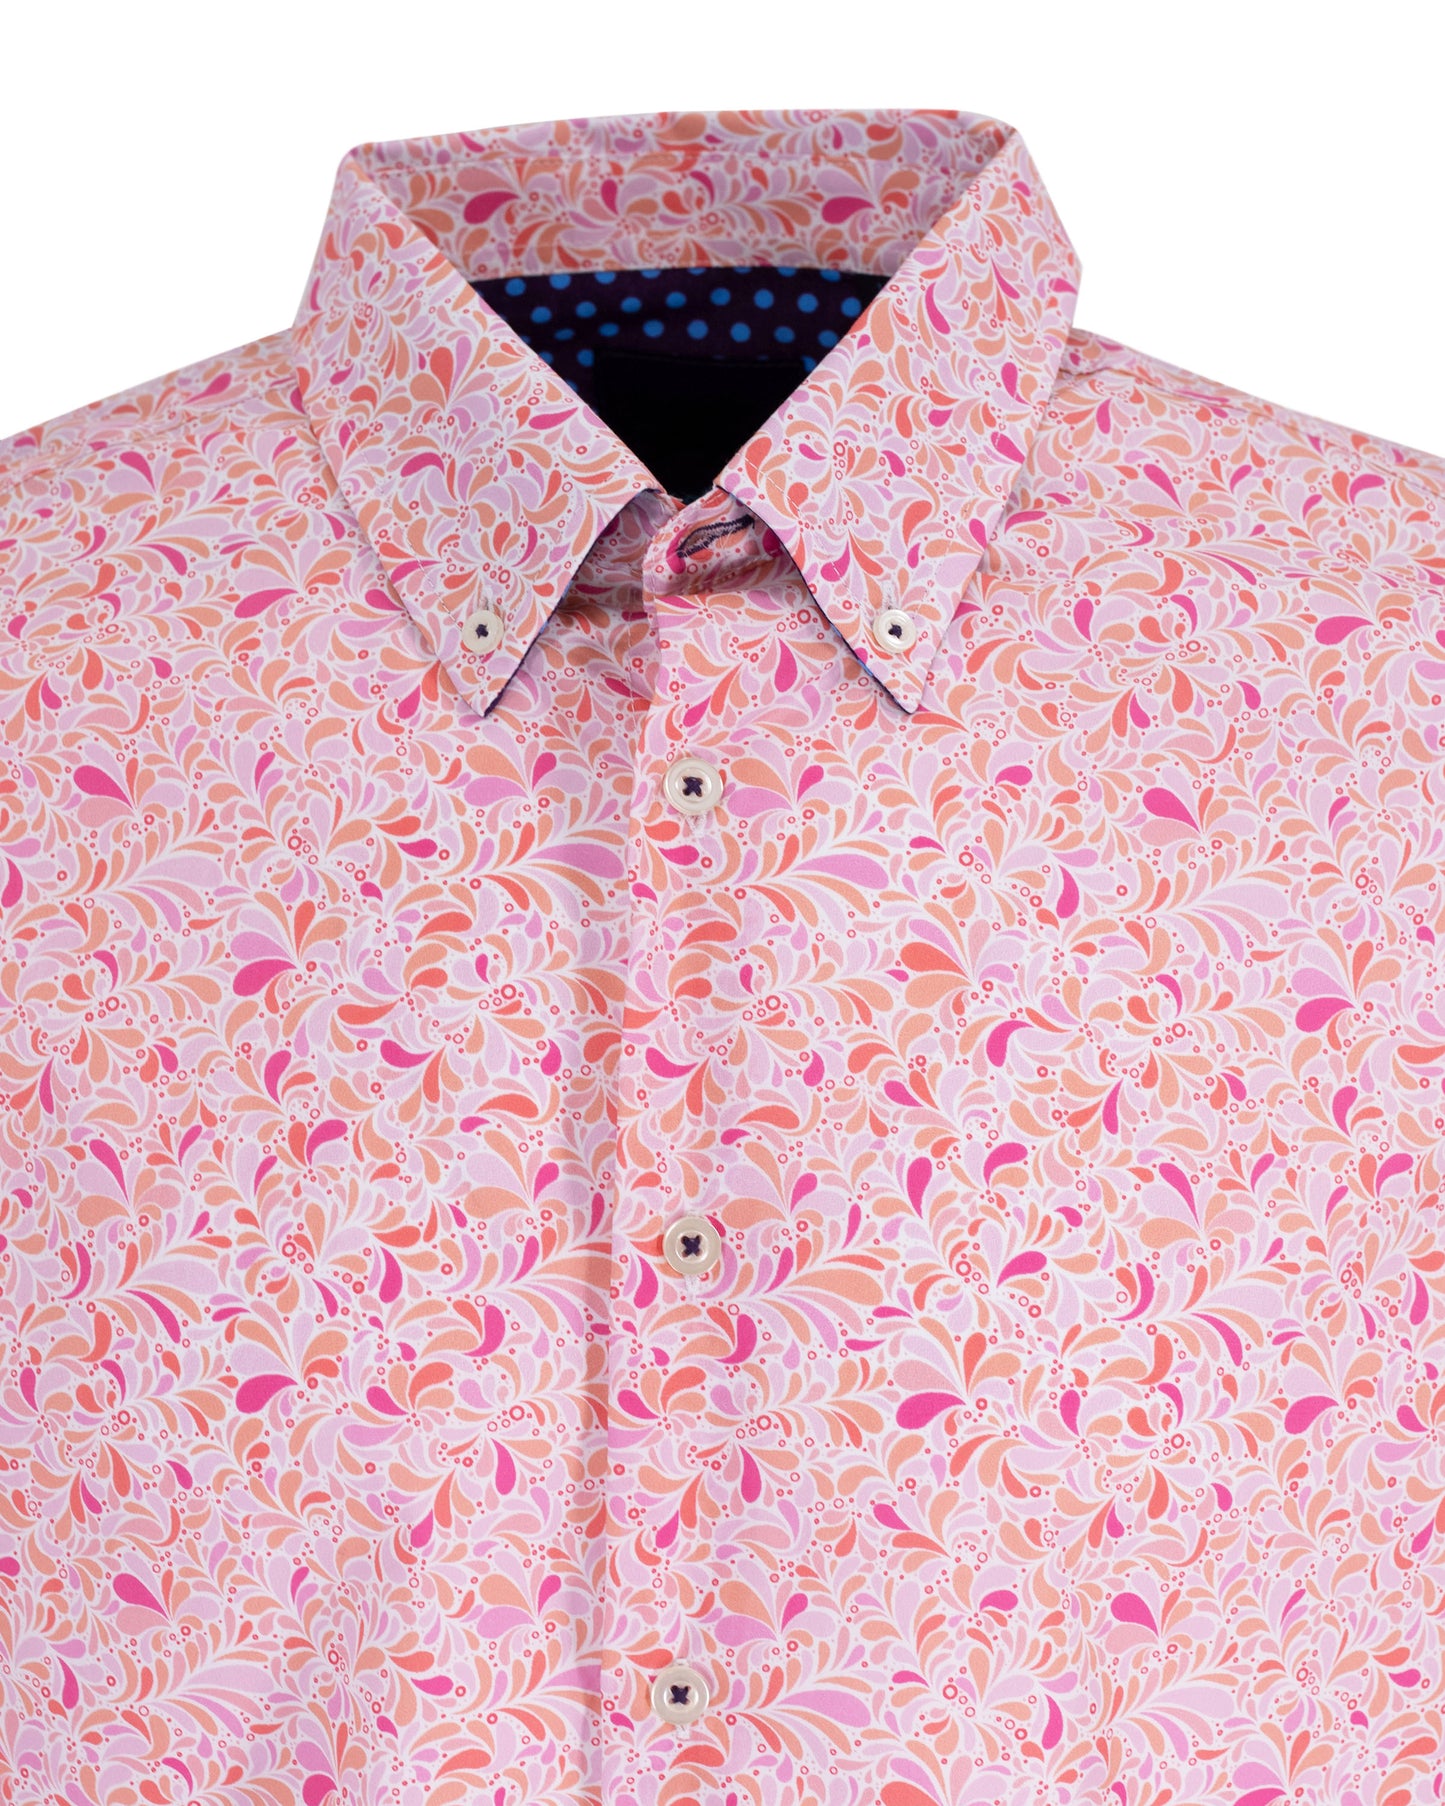 MITCHELL SMALL SWIRL SHIRT IN CANDY